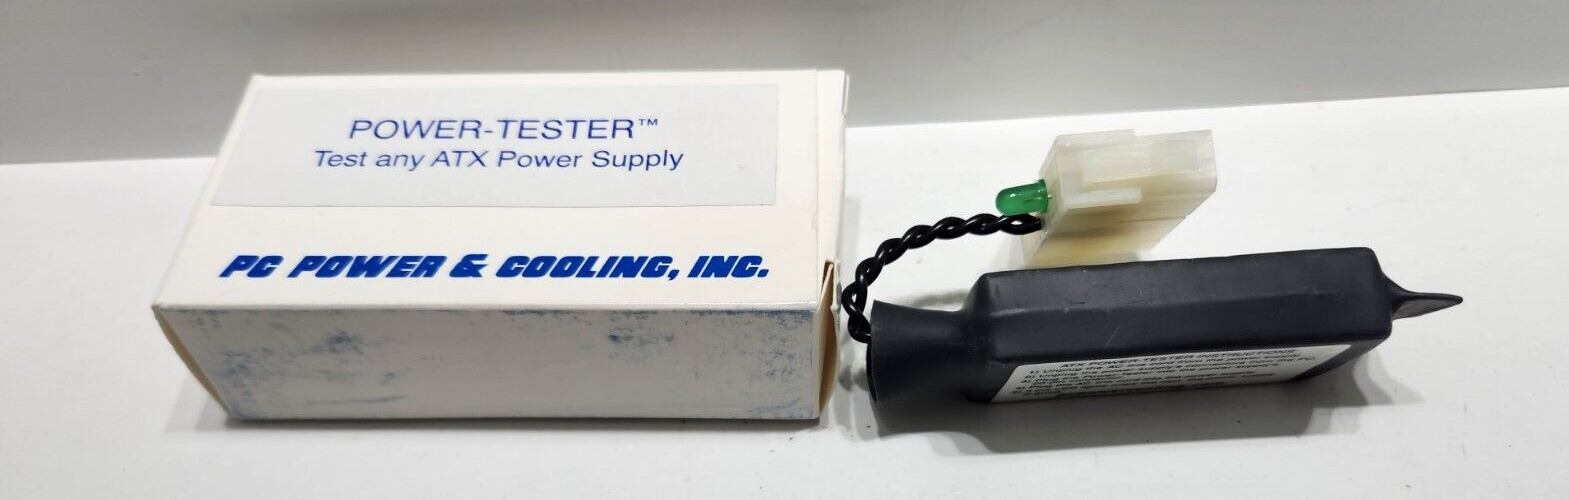 PC Digital Power Supply Tester Test Any ATX Power Supply PC Power & Cooling Inc